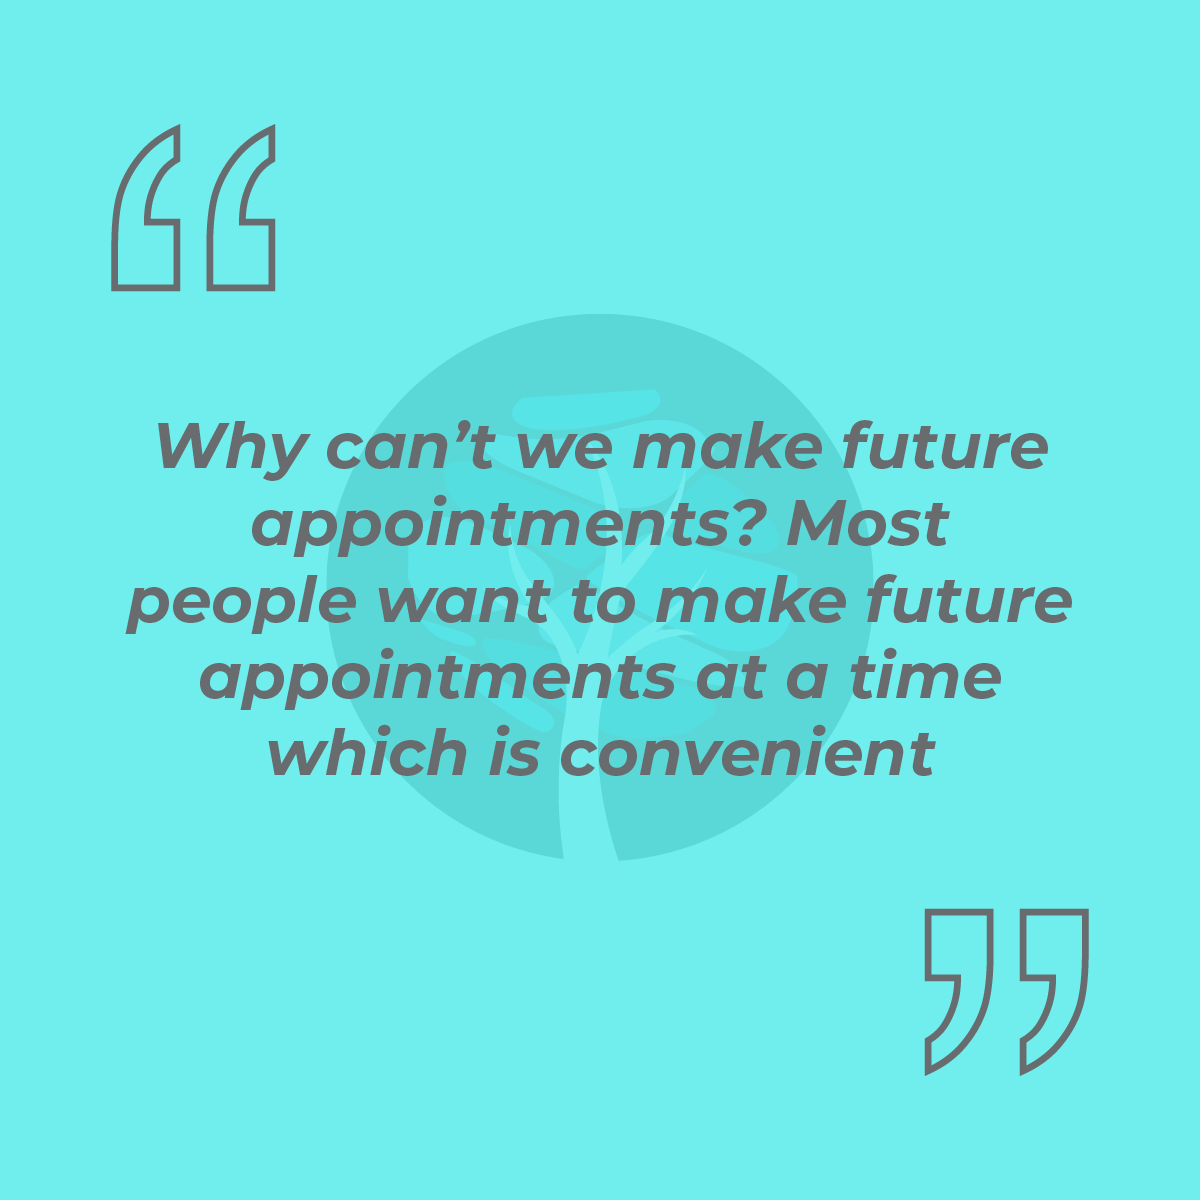 Why can't we make future appointments? Most people want to make future appointments at a time which is convenient